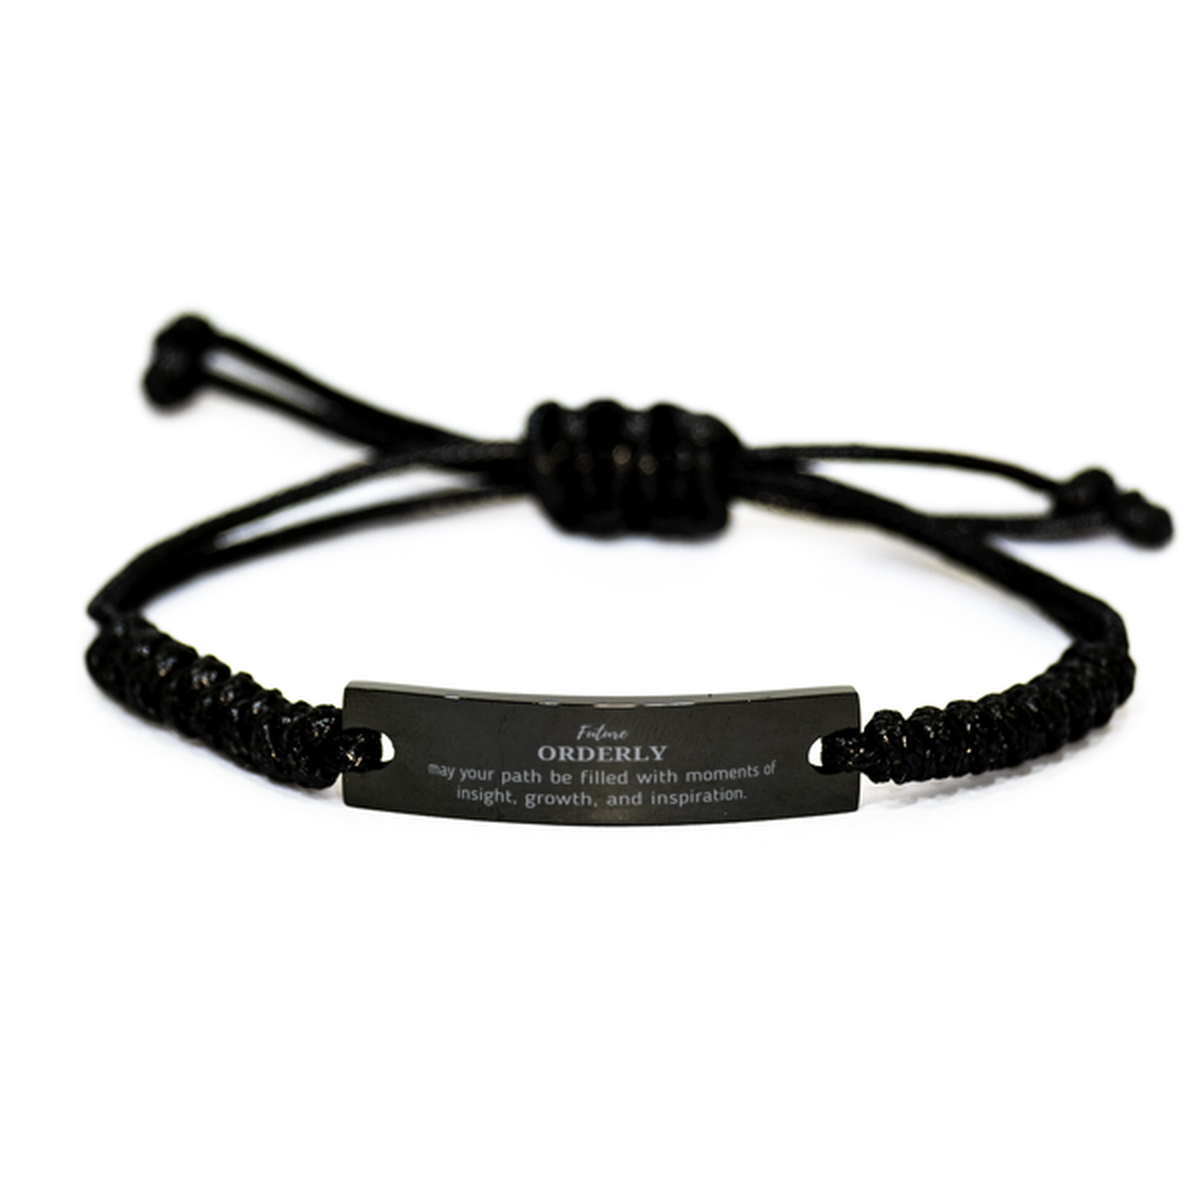 Future Orderly Gifts, May your path be filled with moments of insight, Graduation Gifts for New Orderly, Christmas Unique Black Rope Bracelet For Men, Women, Friends